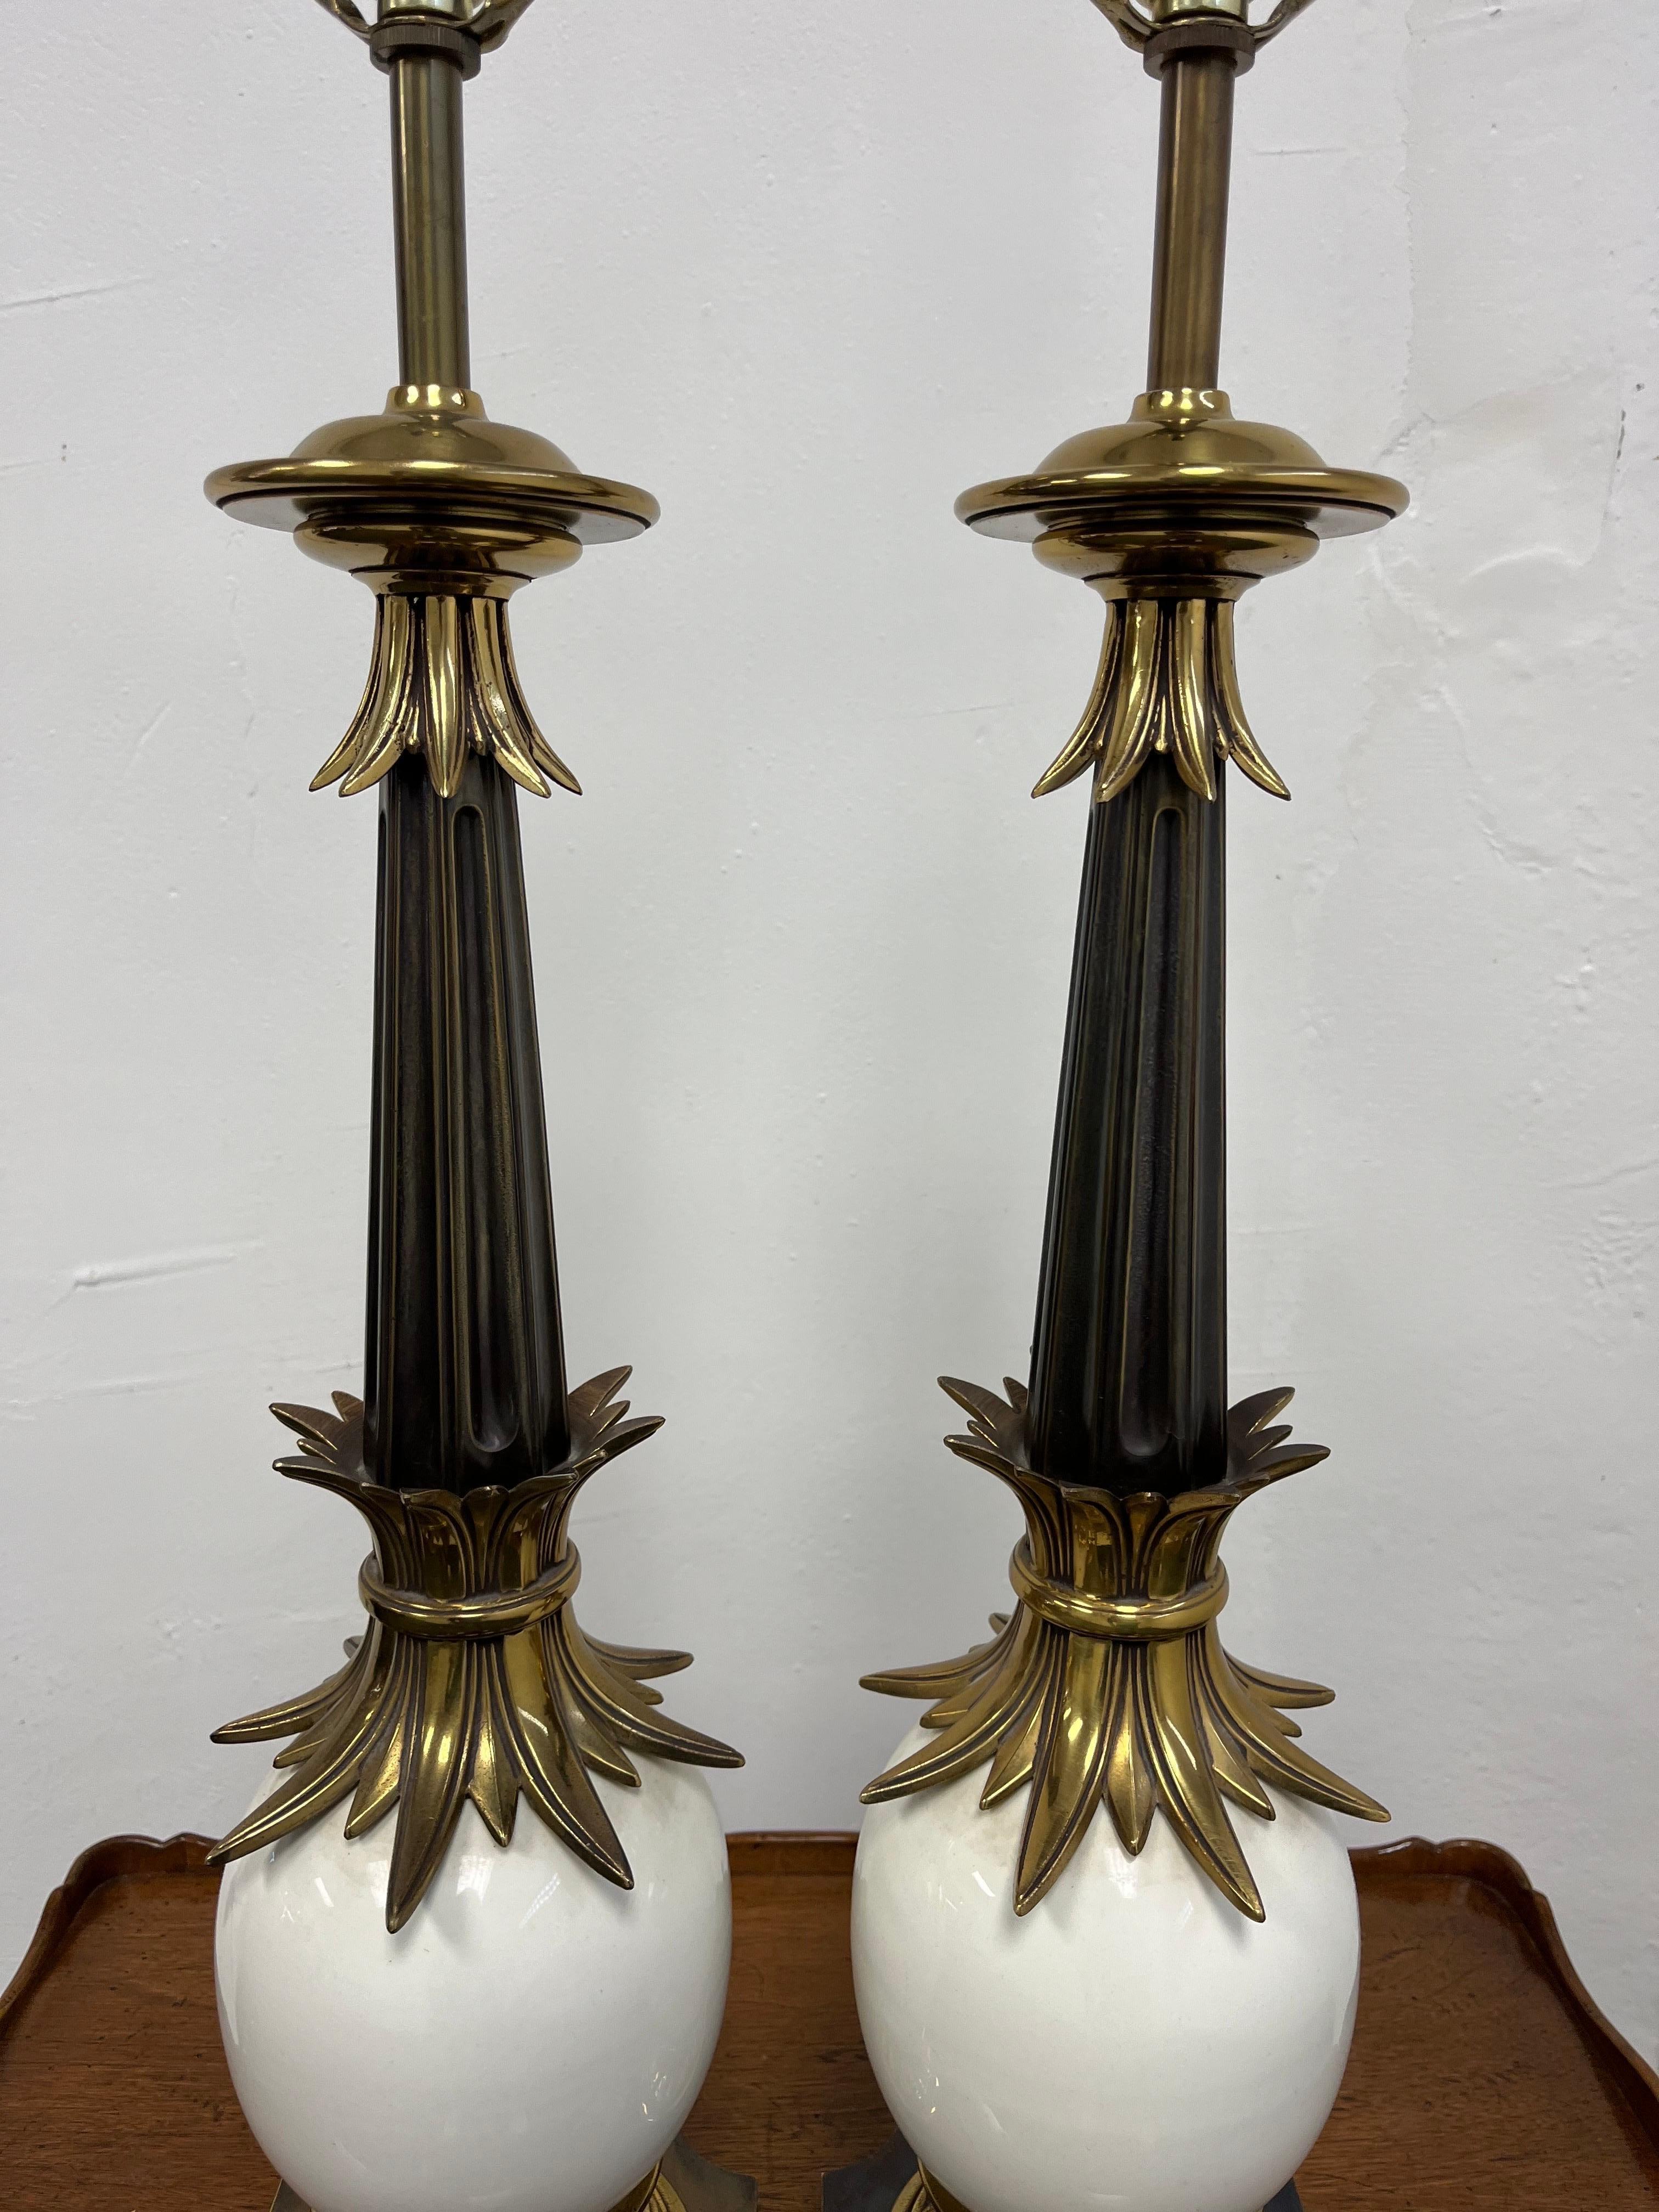 Striking pair of Ostrich egg lamps by Stiffel. Well constructed lamps are made with brass and porcelain and solid brass finial. Condition is excellent.